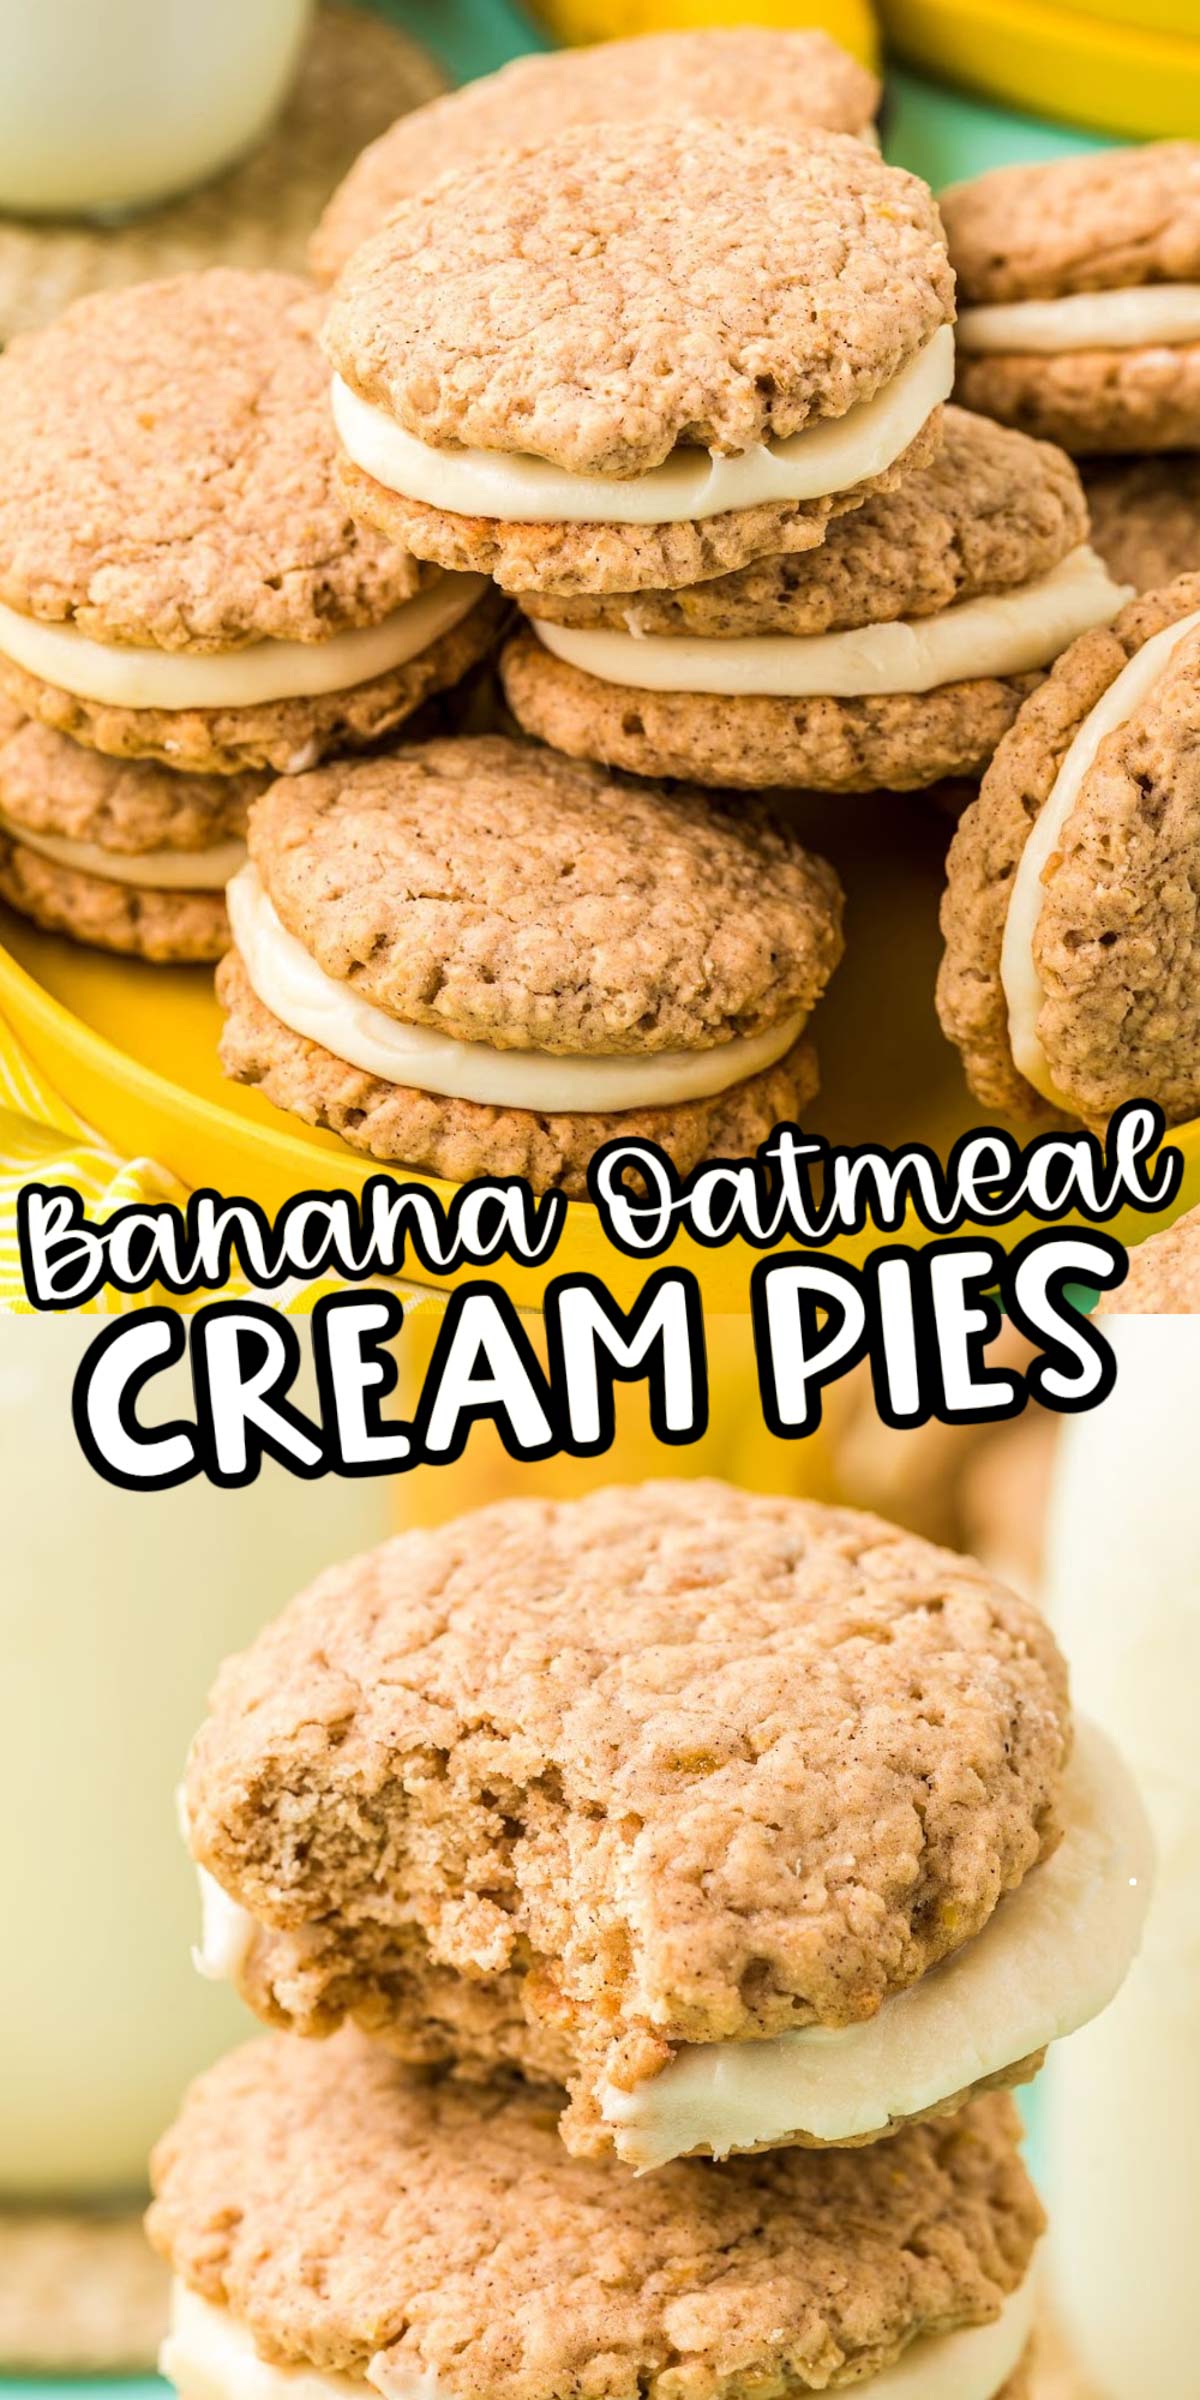 Banana Oatmeal Cream Pies combine ripened bananas with pantry staple ingredients and a 5-ingredient fluffy vanilla cream cheese frosting! Ready to enjoy in under an hour! via @sugarandsoulco